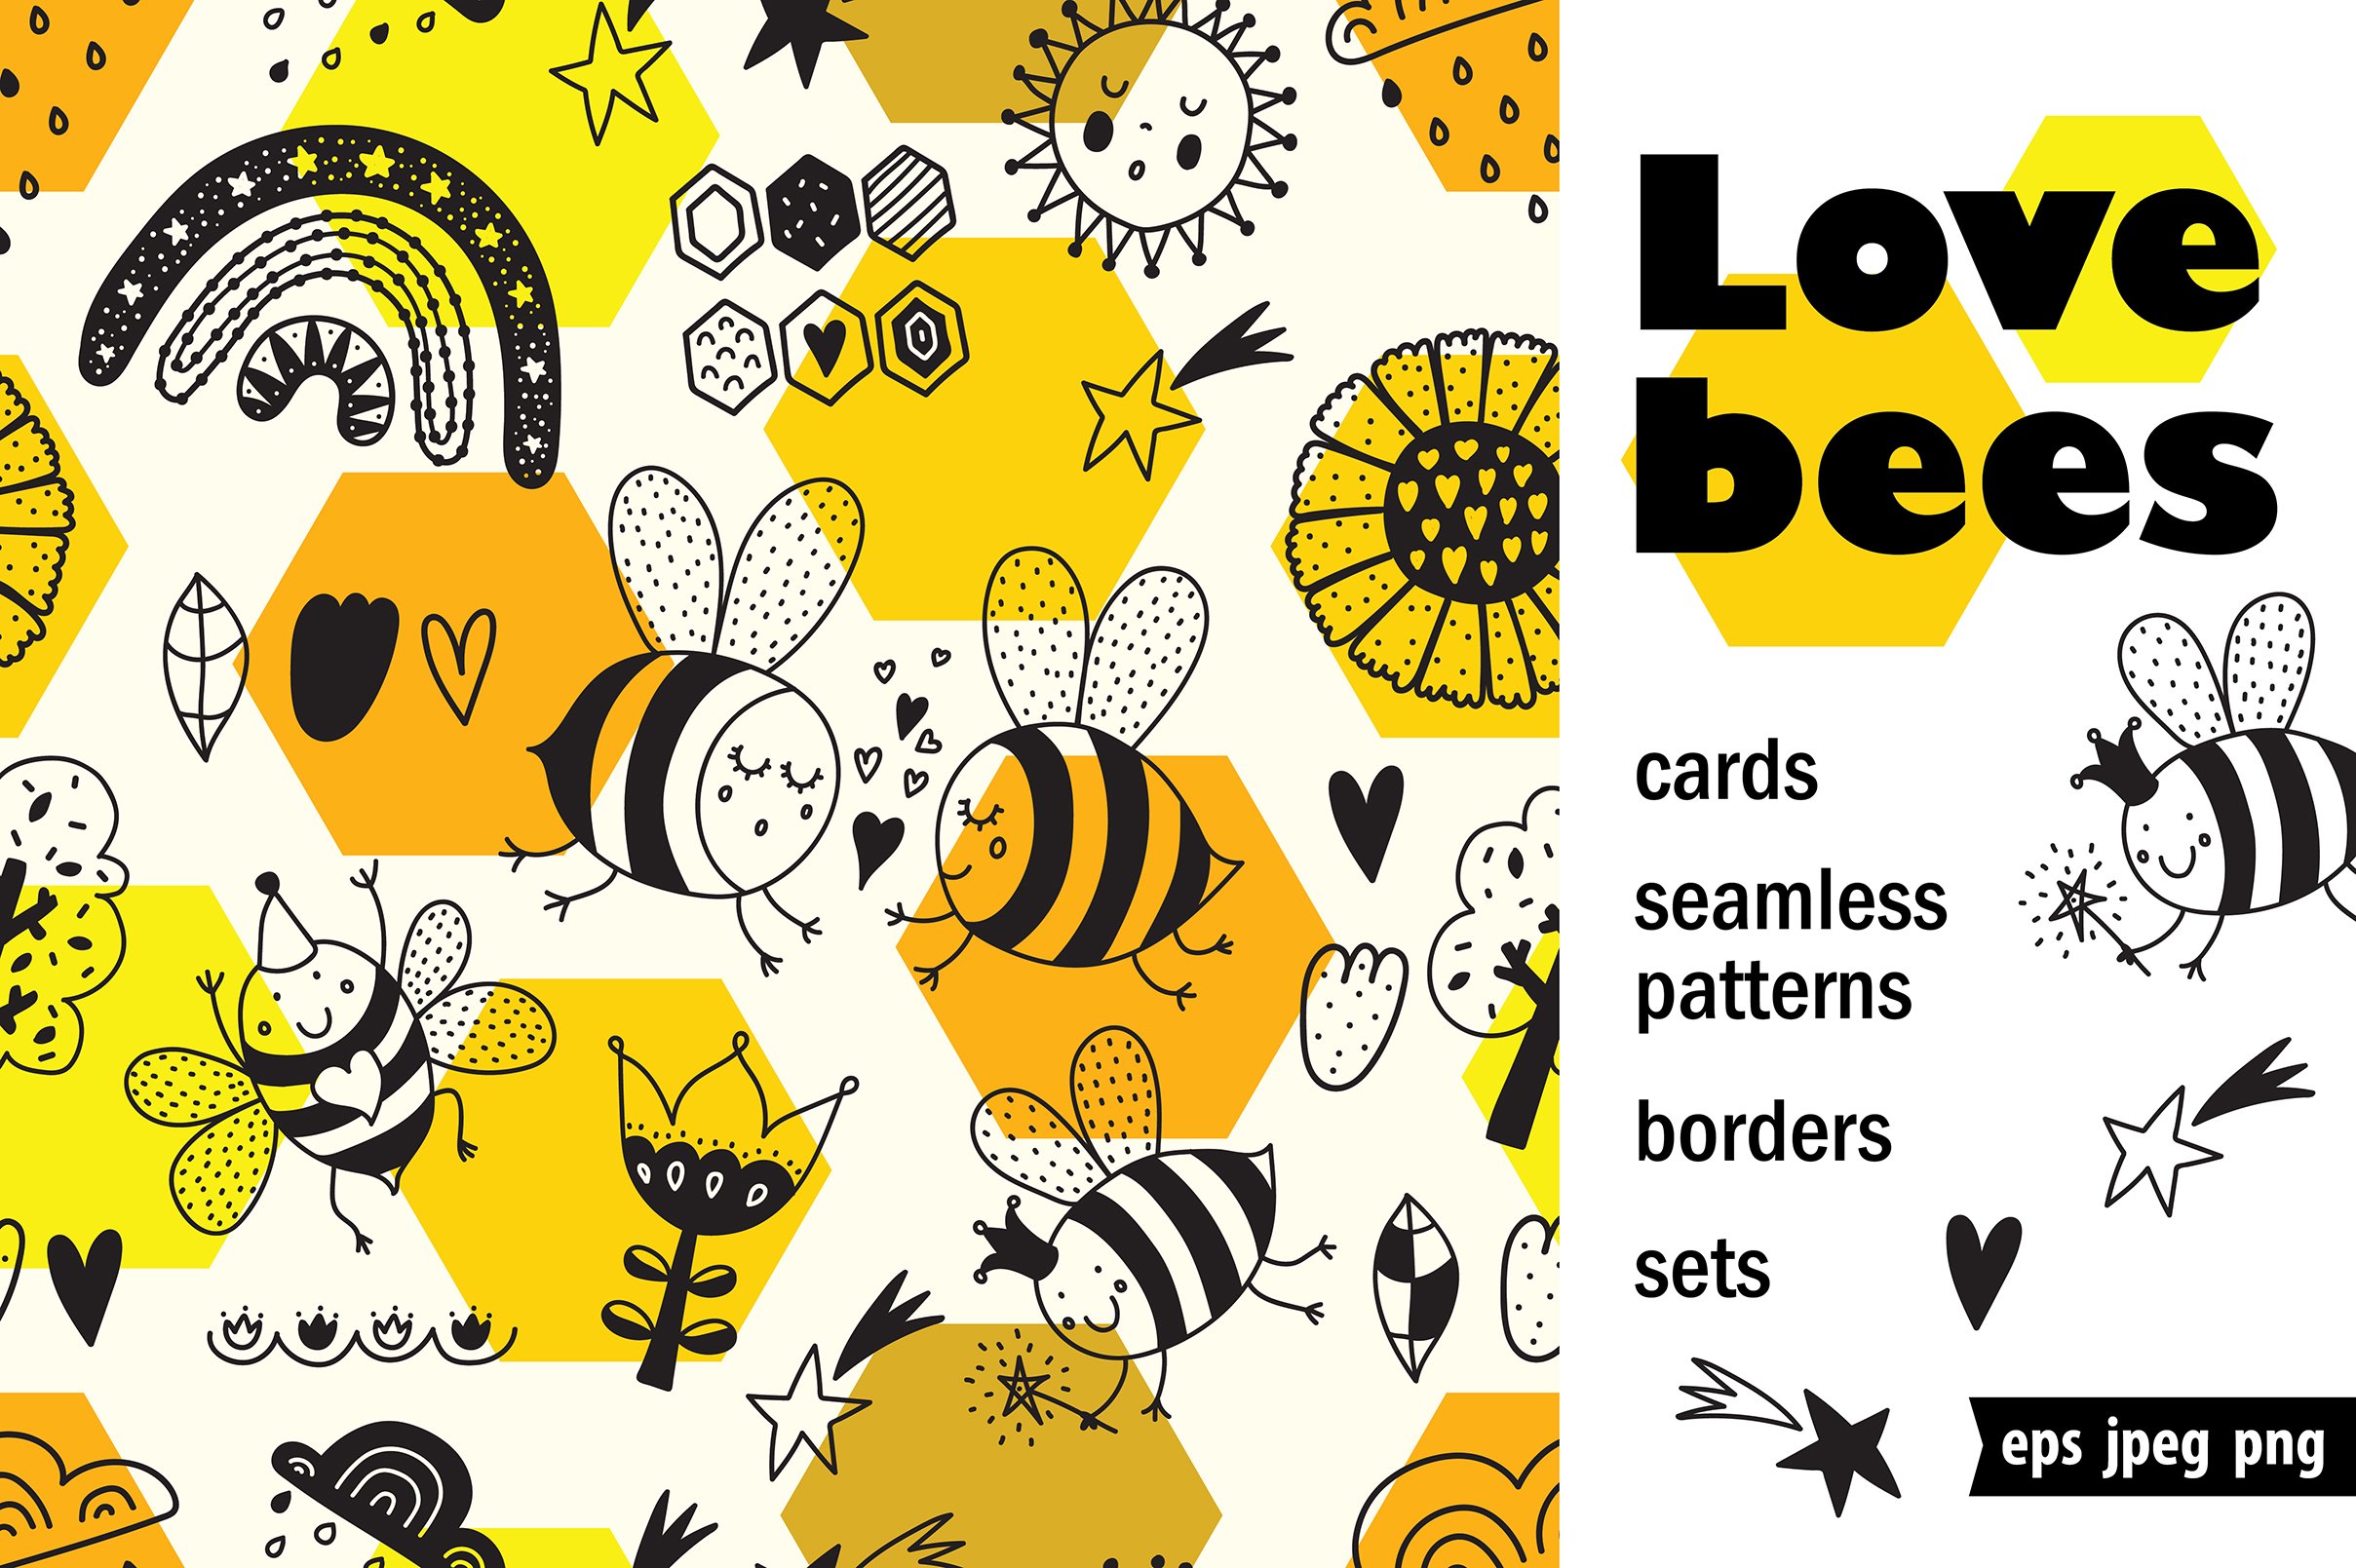 Love bees! cover image.